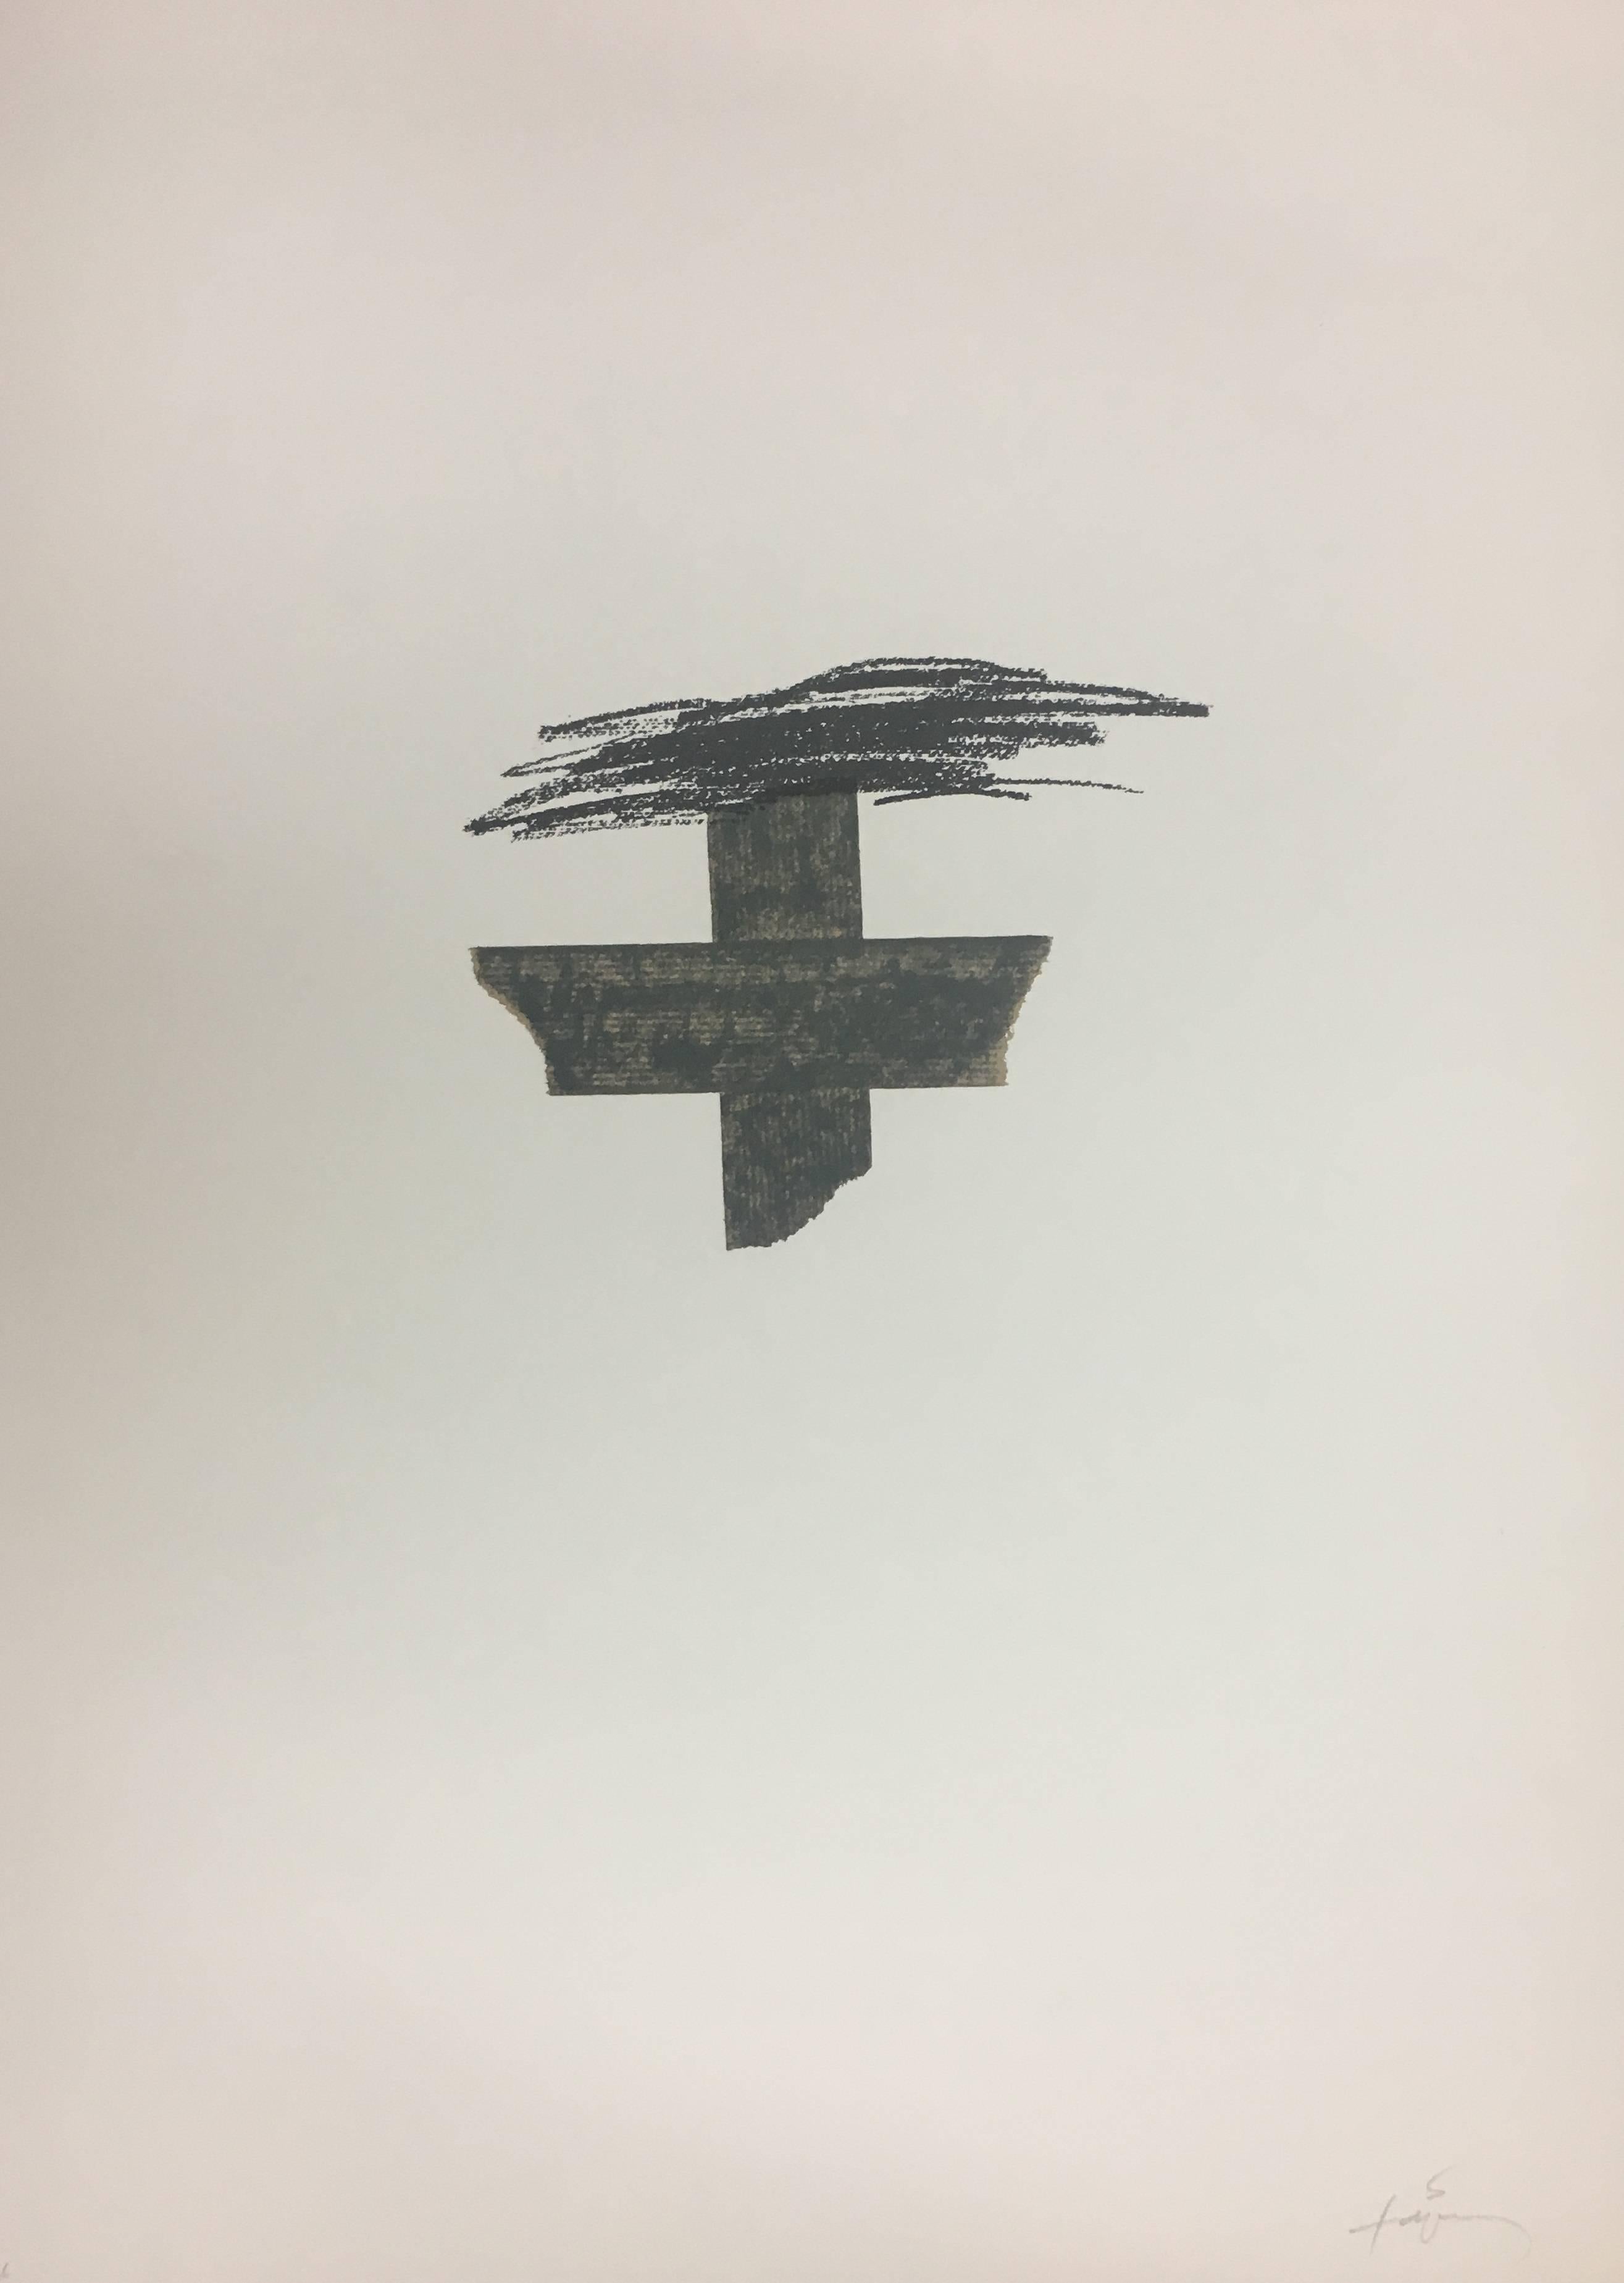 Tapies  Black Cross  Vertical 1975 original lithography painting - Print by Antoni Tàpies